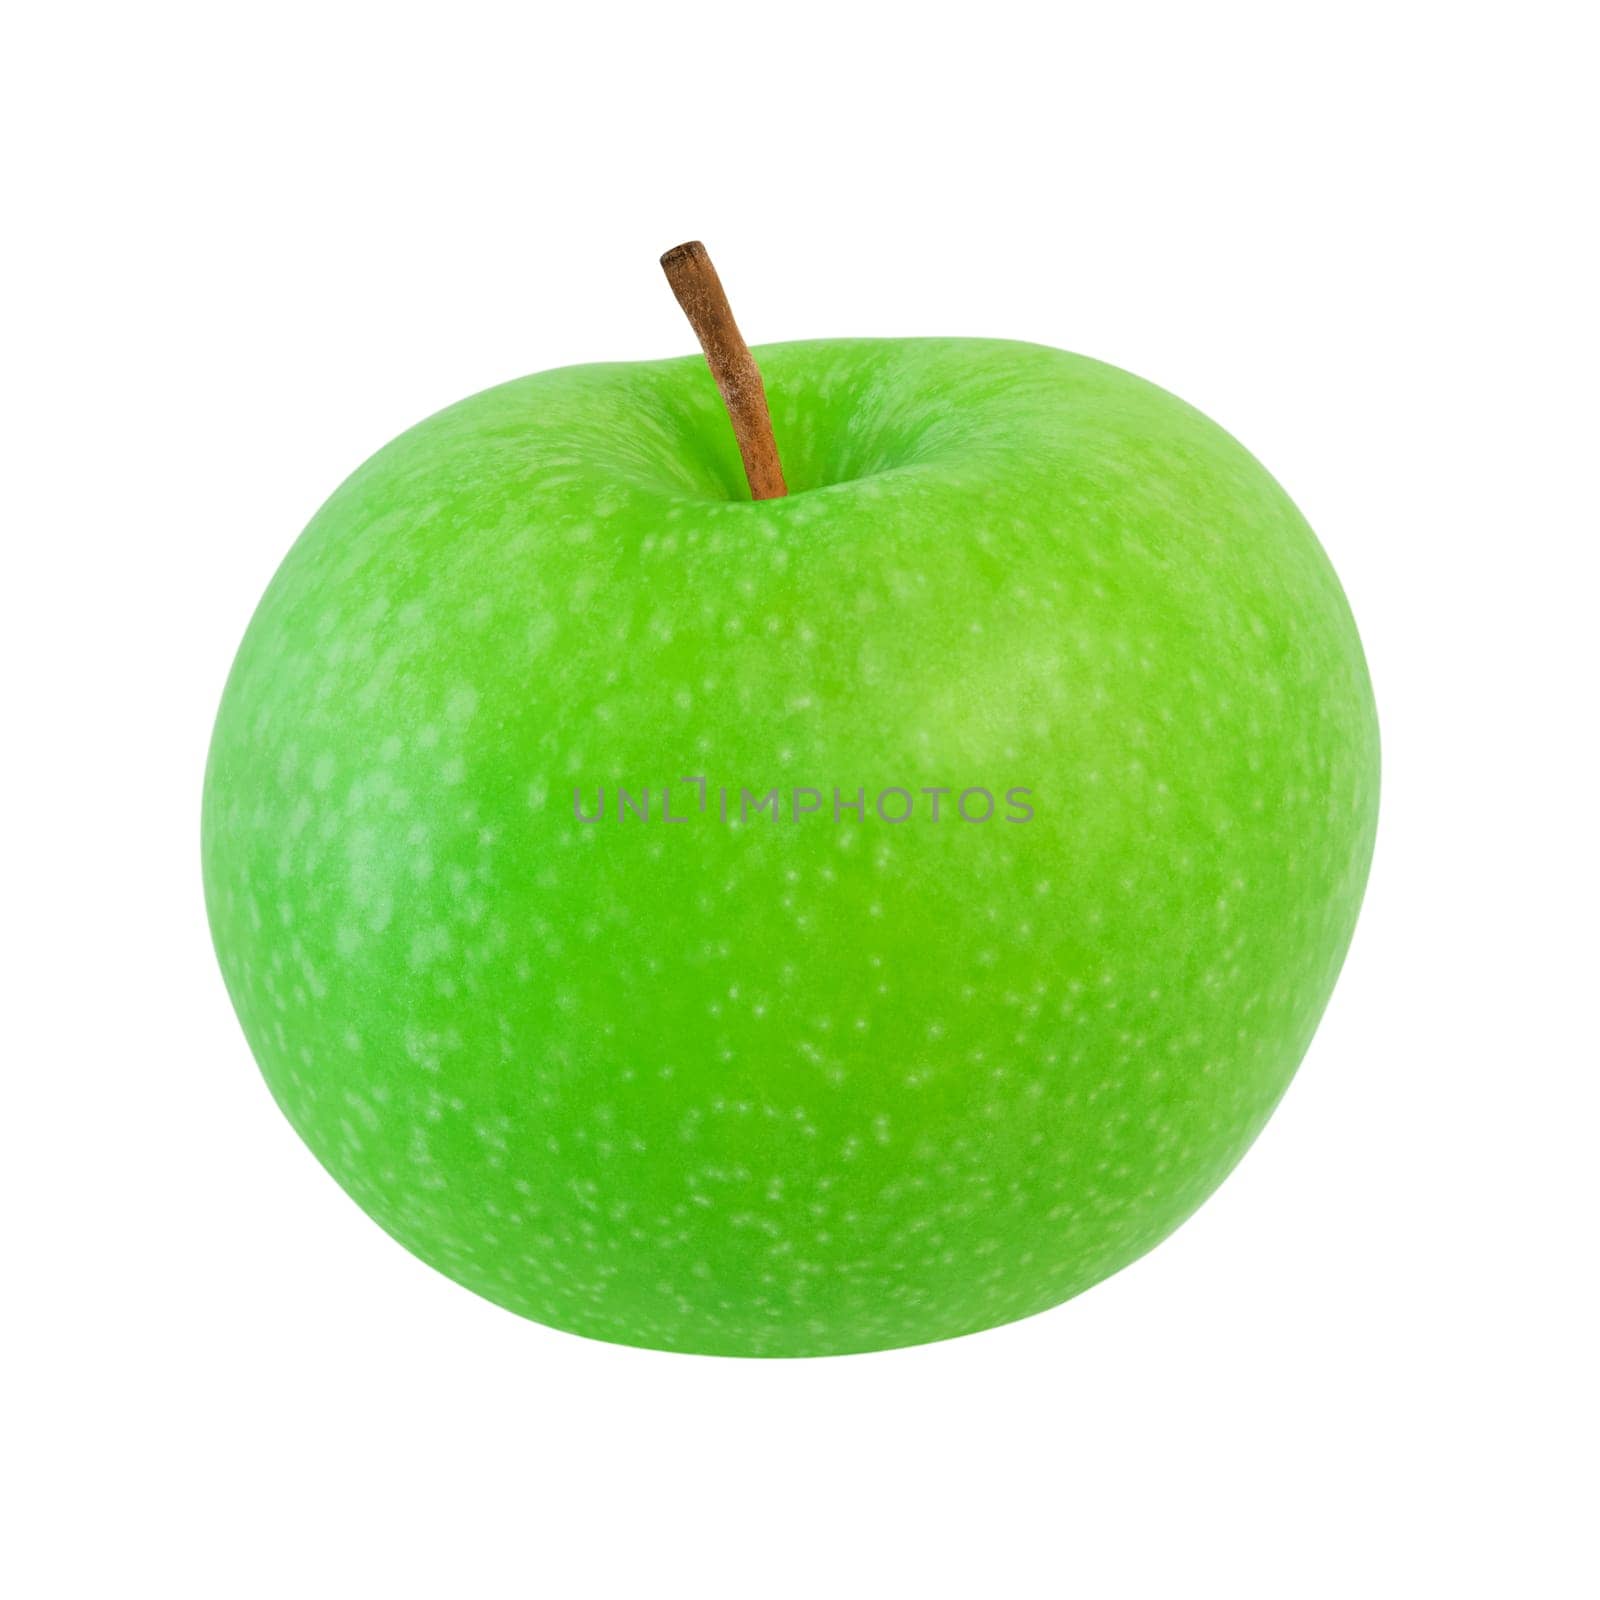 Green apple isolated on a white background. Stock photography.